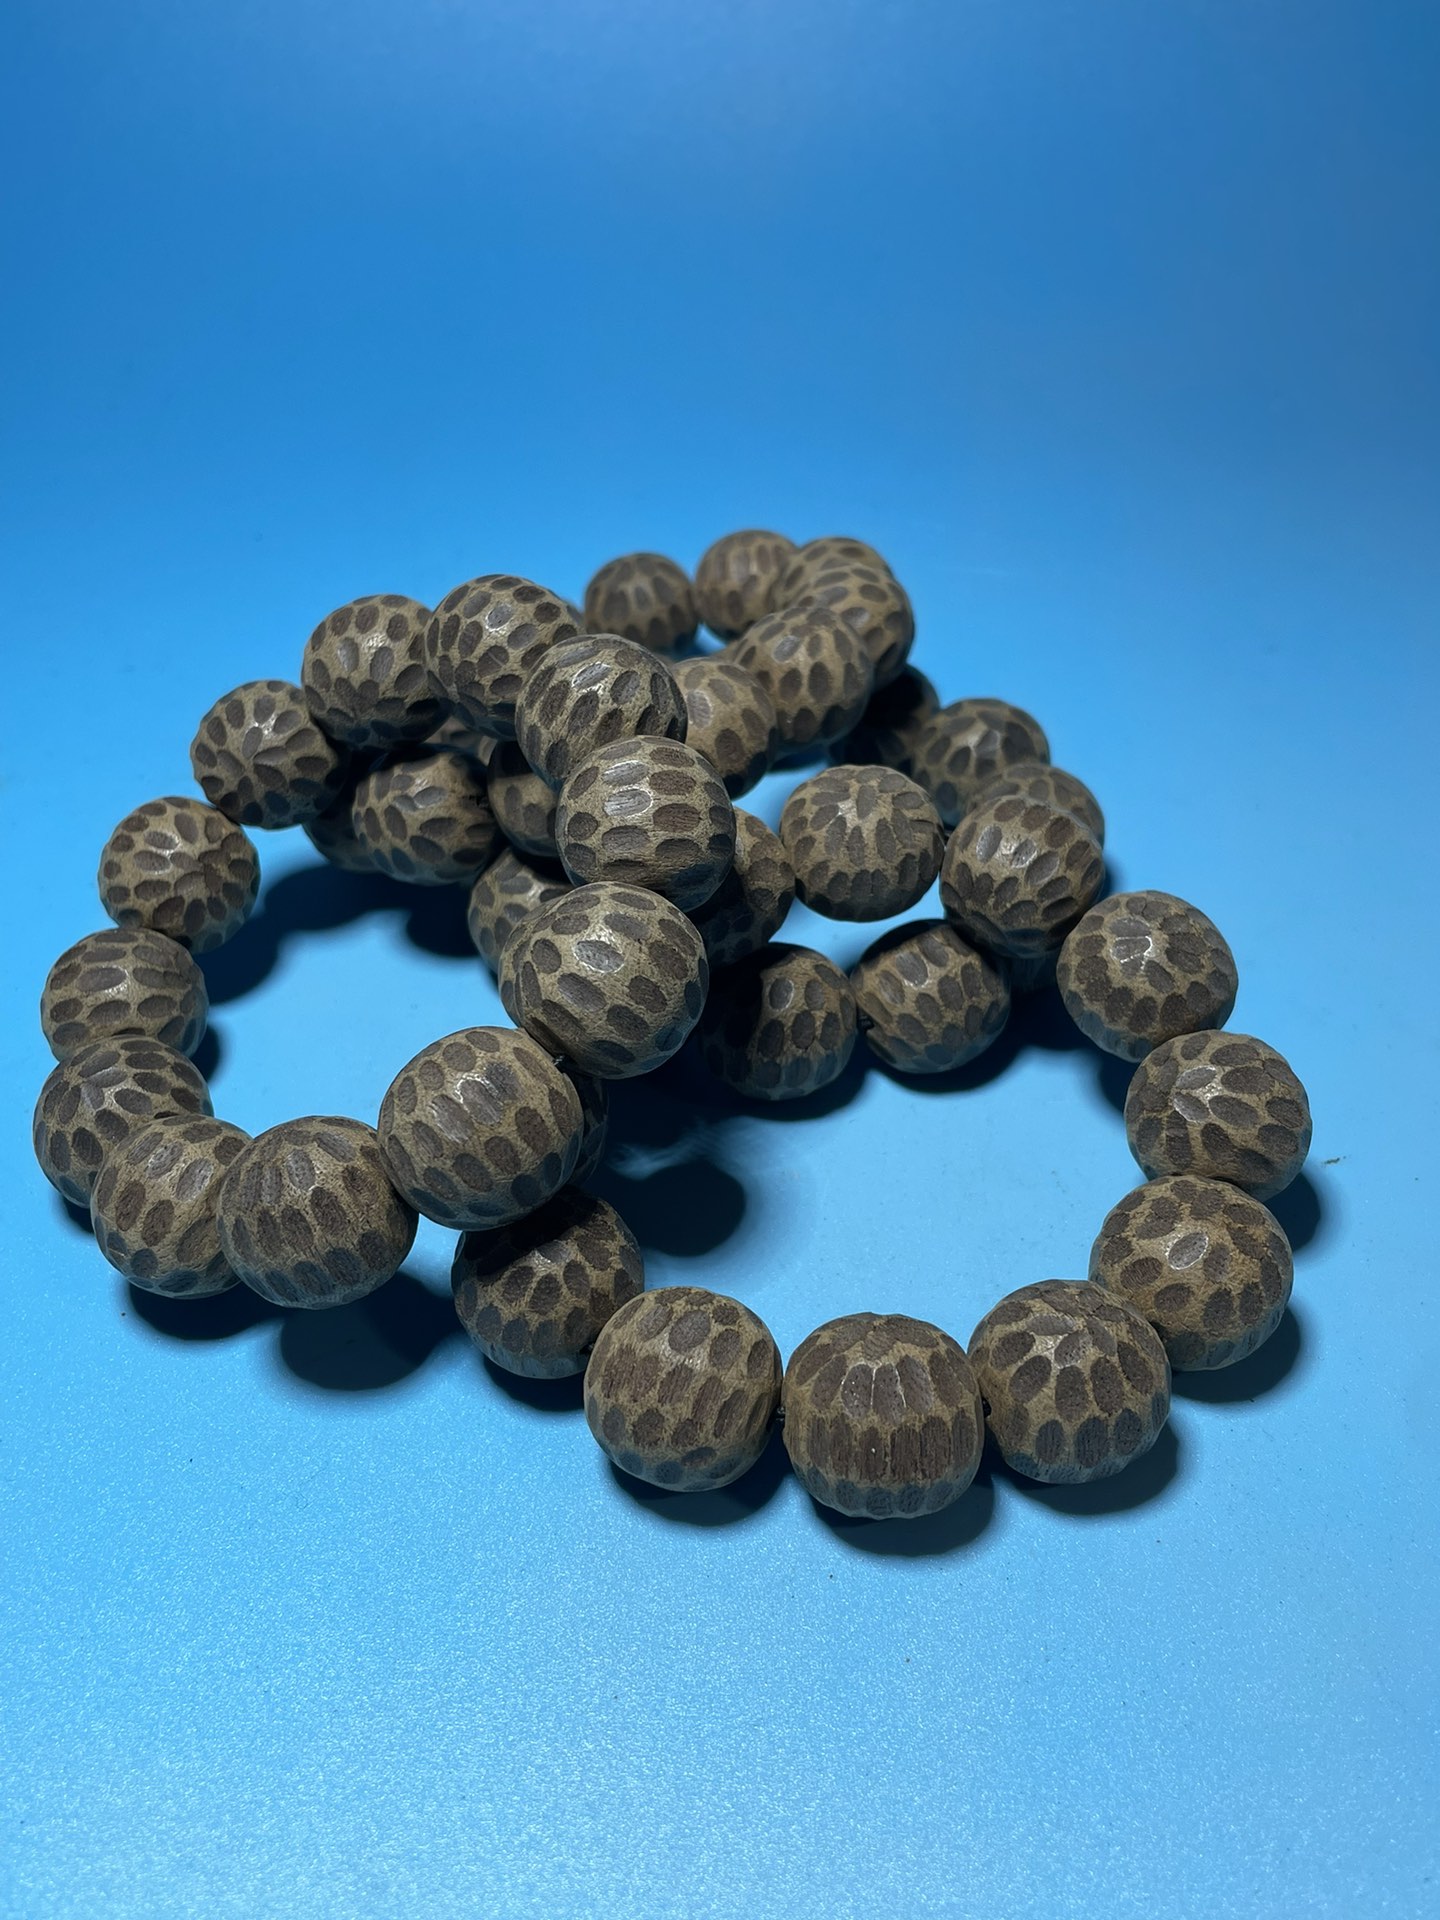 Exquisite collection of old material agarwood bracelets - Image 4 of 8